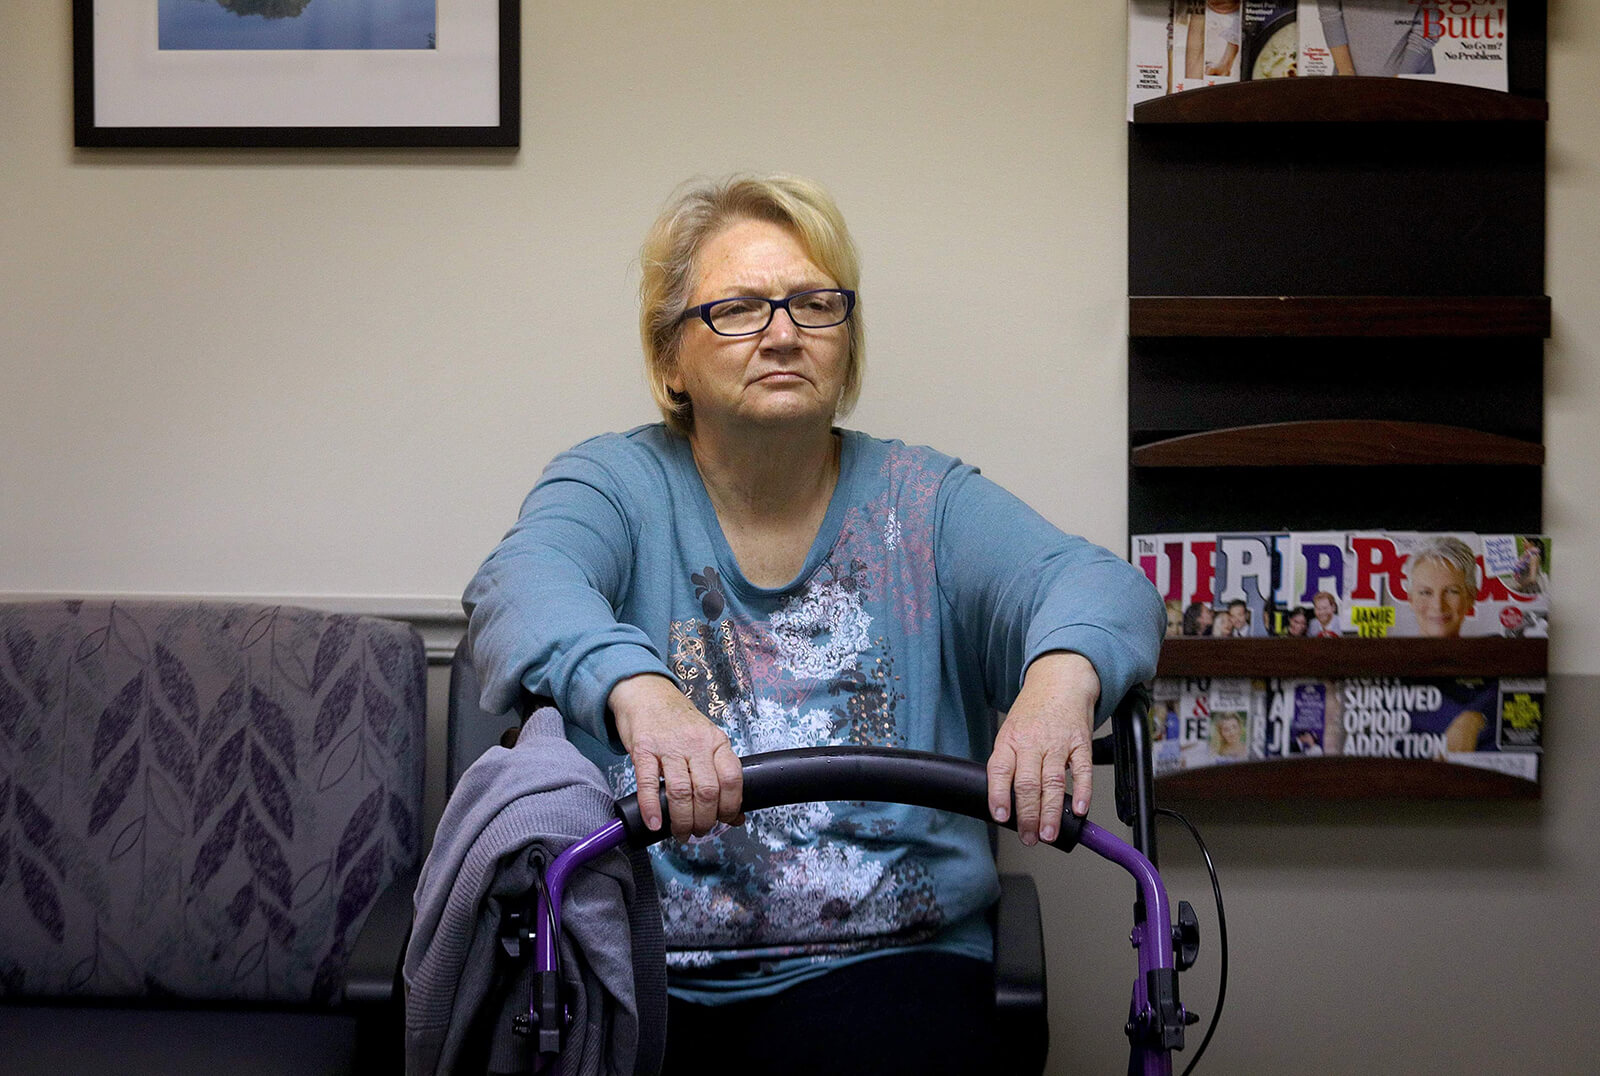 Lonni Schicker takes a seat in the waiting room on Tuesday, Nov. 1, 2018, before a followup visit with her neurologist at Mercy Hospital St. Louis. Twice while she is waiting, she asks her son what the date is. She says her short-term memory has worsened and her hands shake more.